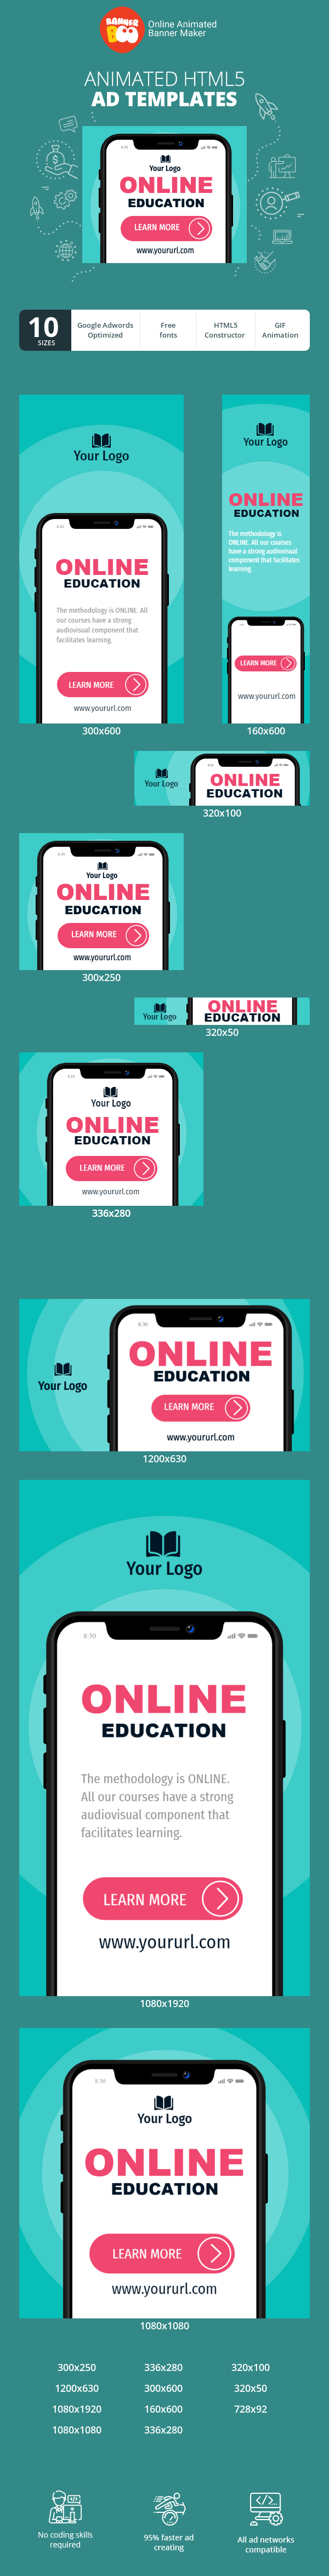 Banner ad template — Online Education Iphone